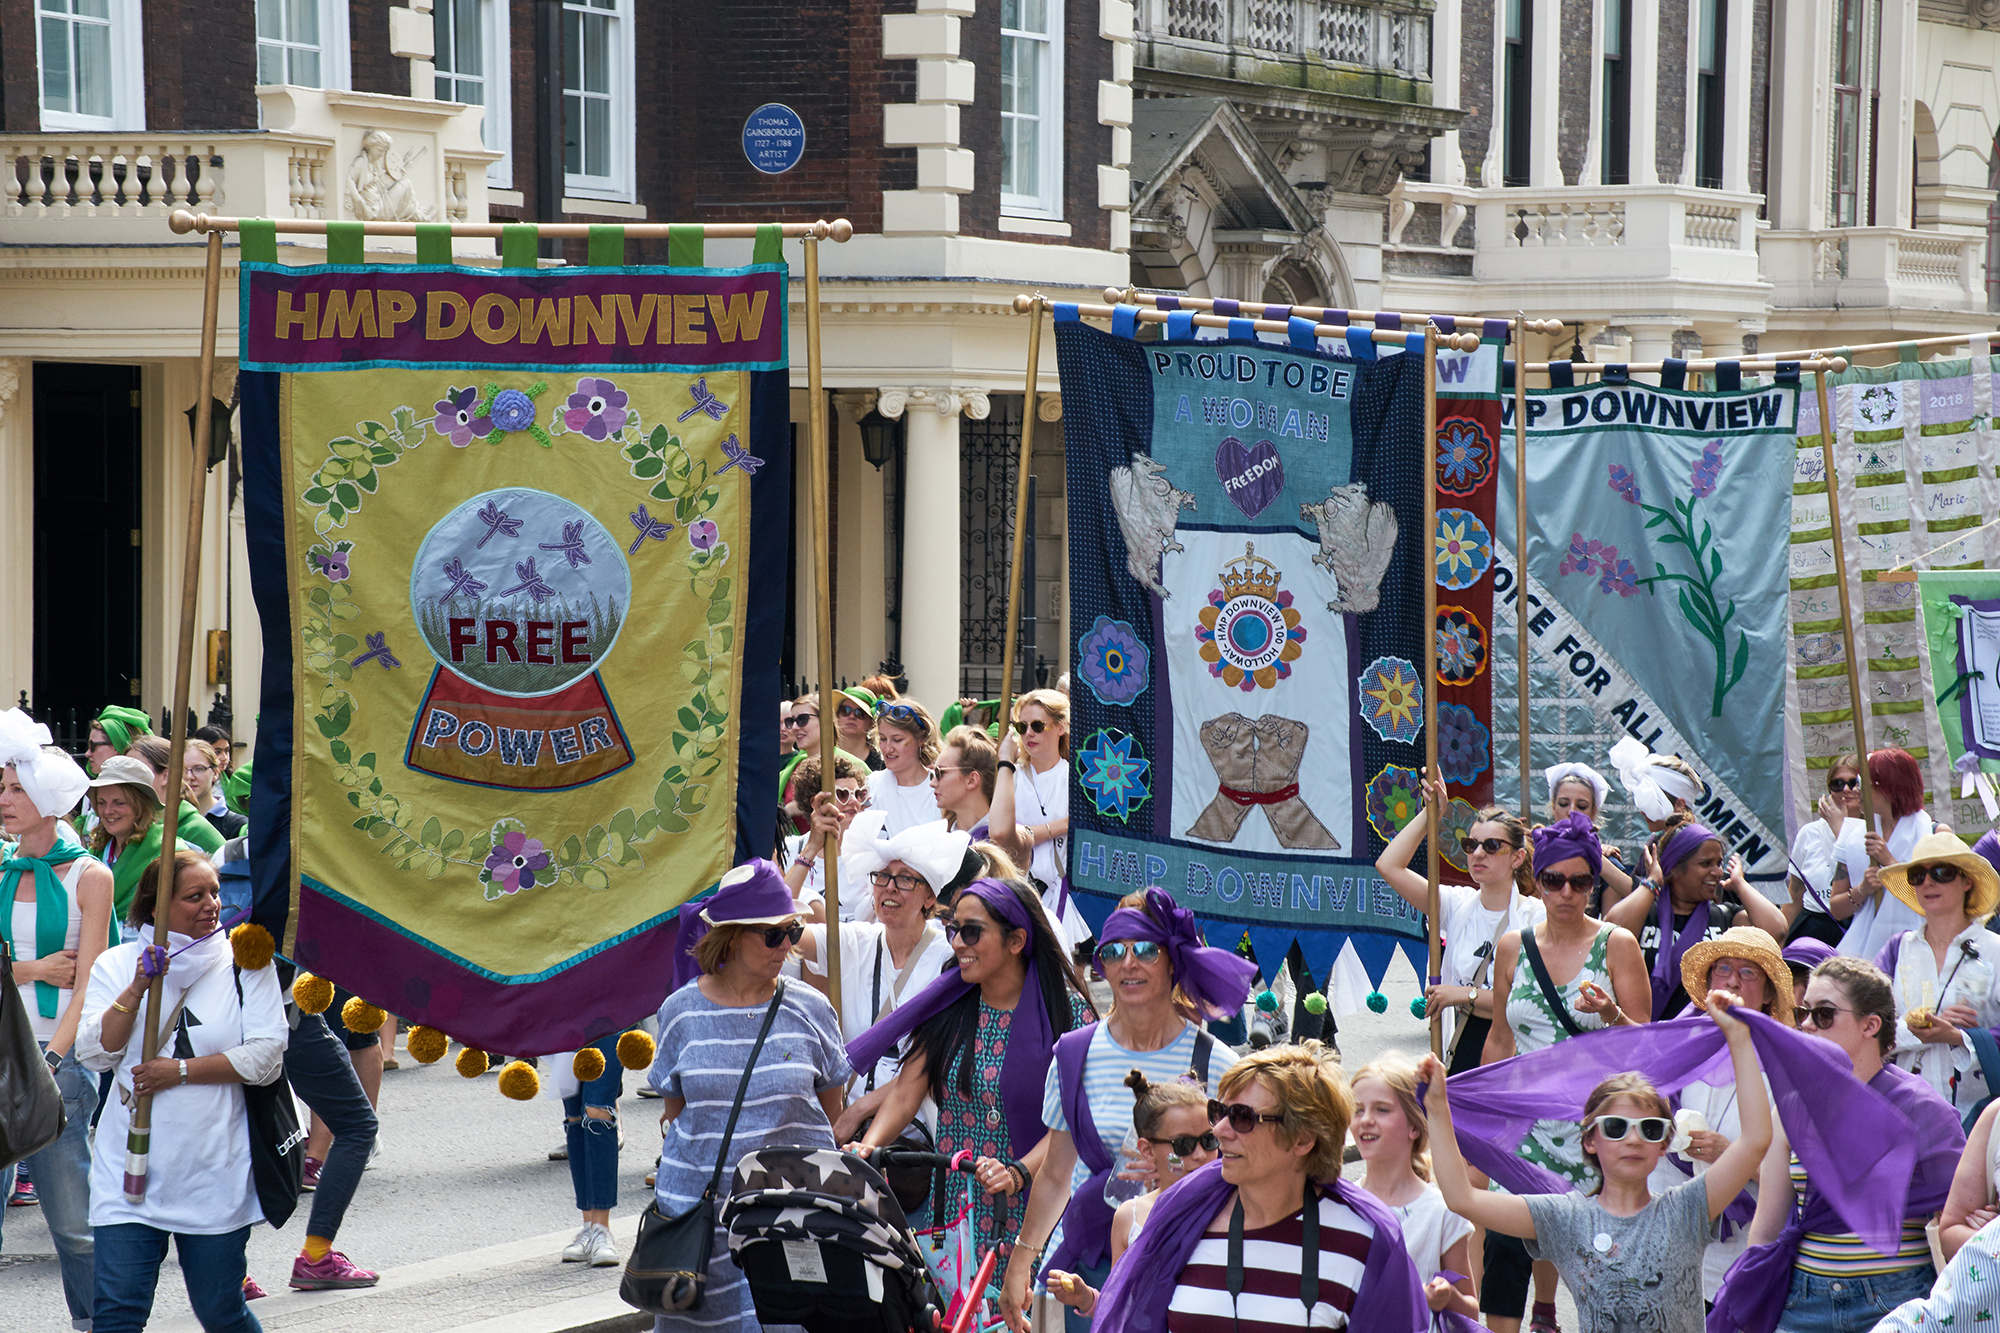 Three of the banners are marched down Whitehall by women and girls wearing green white and purple.  The banners have a mixture of empowering statements such as ‘HMP Downview Free Power’, ‘Proud to be a woman’ ‘Votes for all women’.